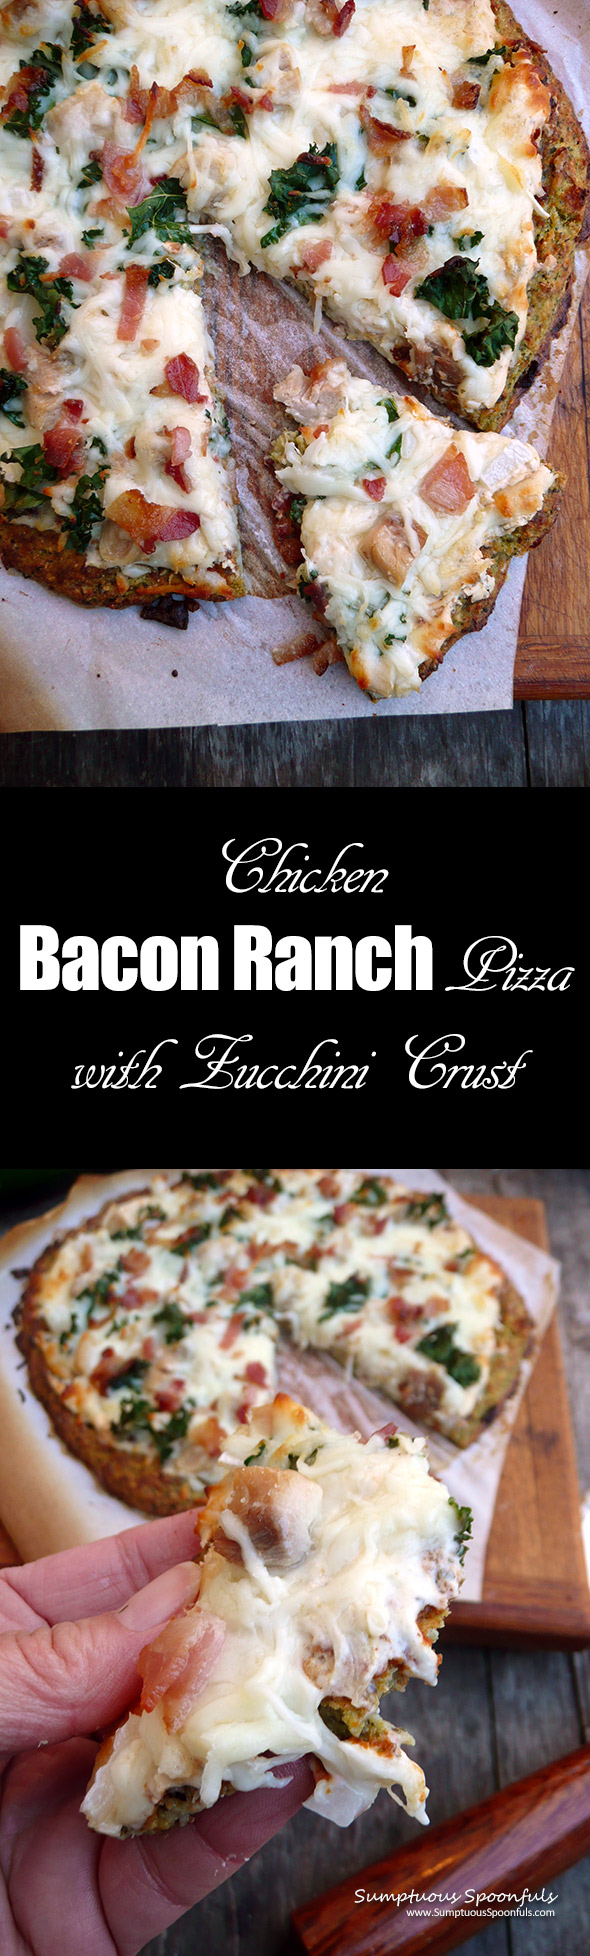 Chicken Bacon Ranch Pizza with Zucchini Crust ~ Sumptuous Spoonfuls #low-carb #pizza #recipe